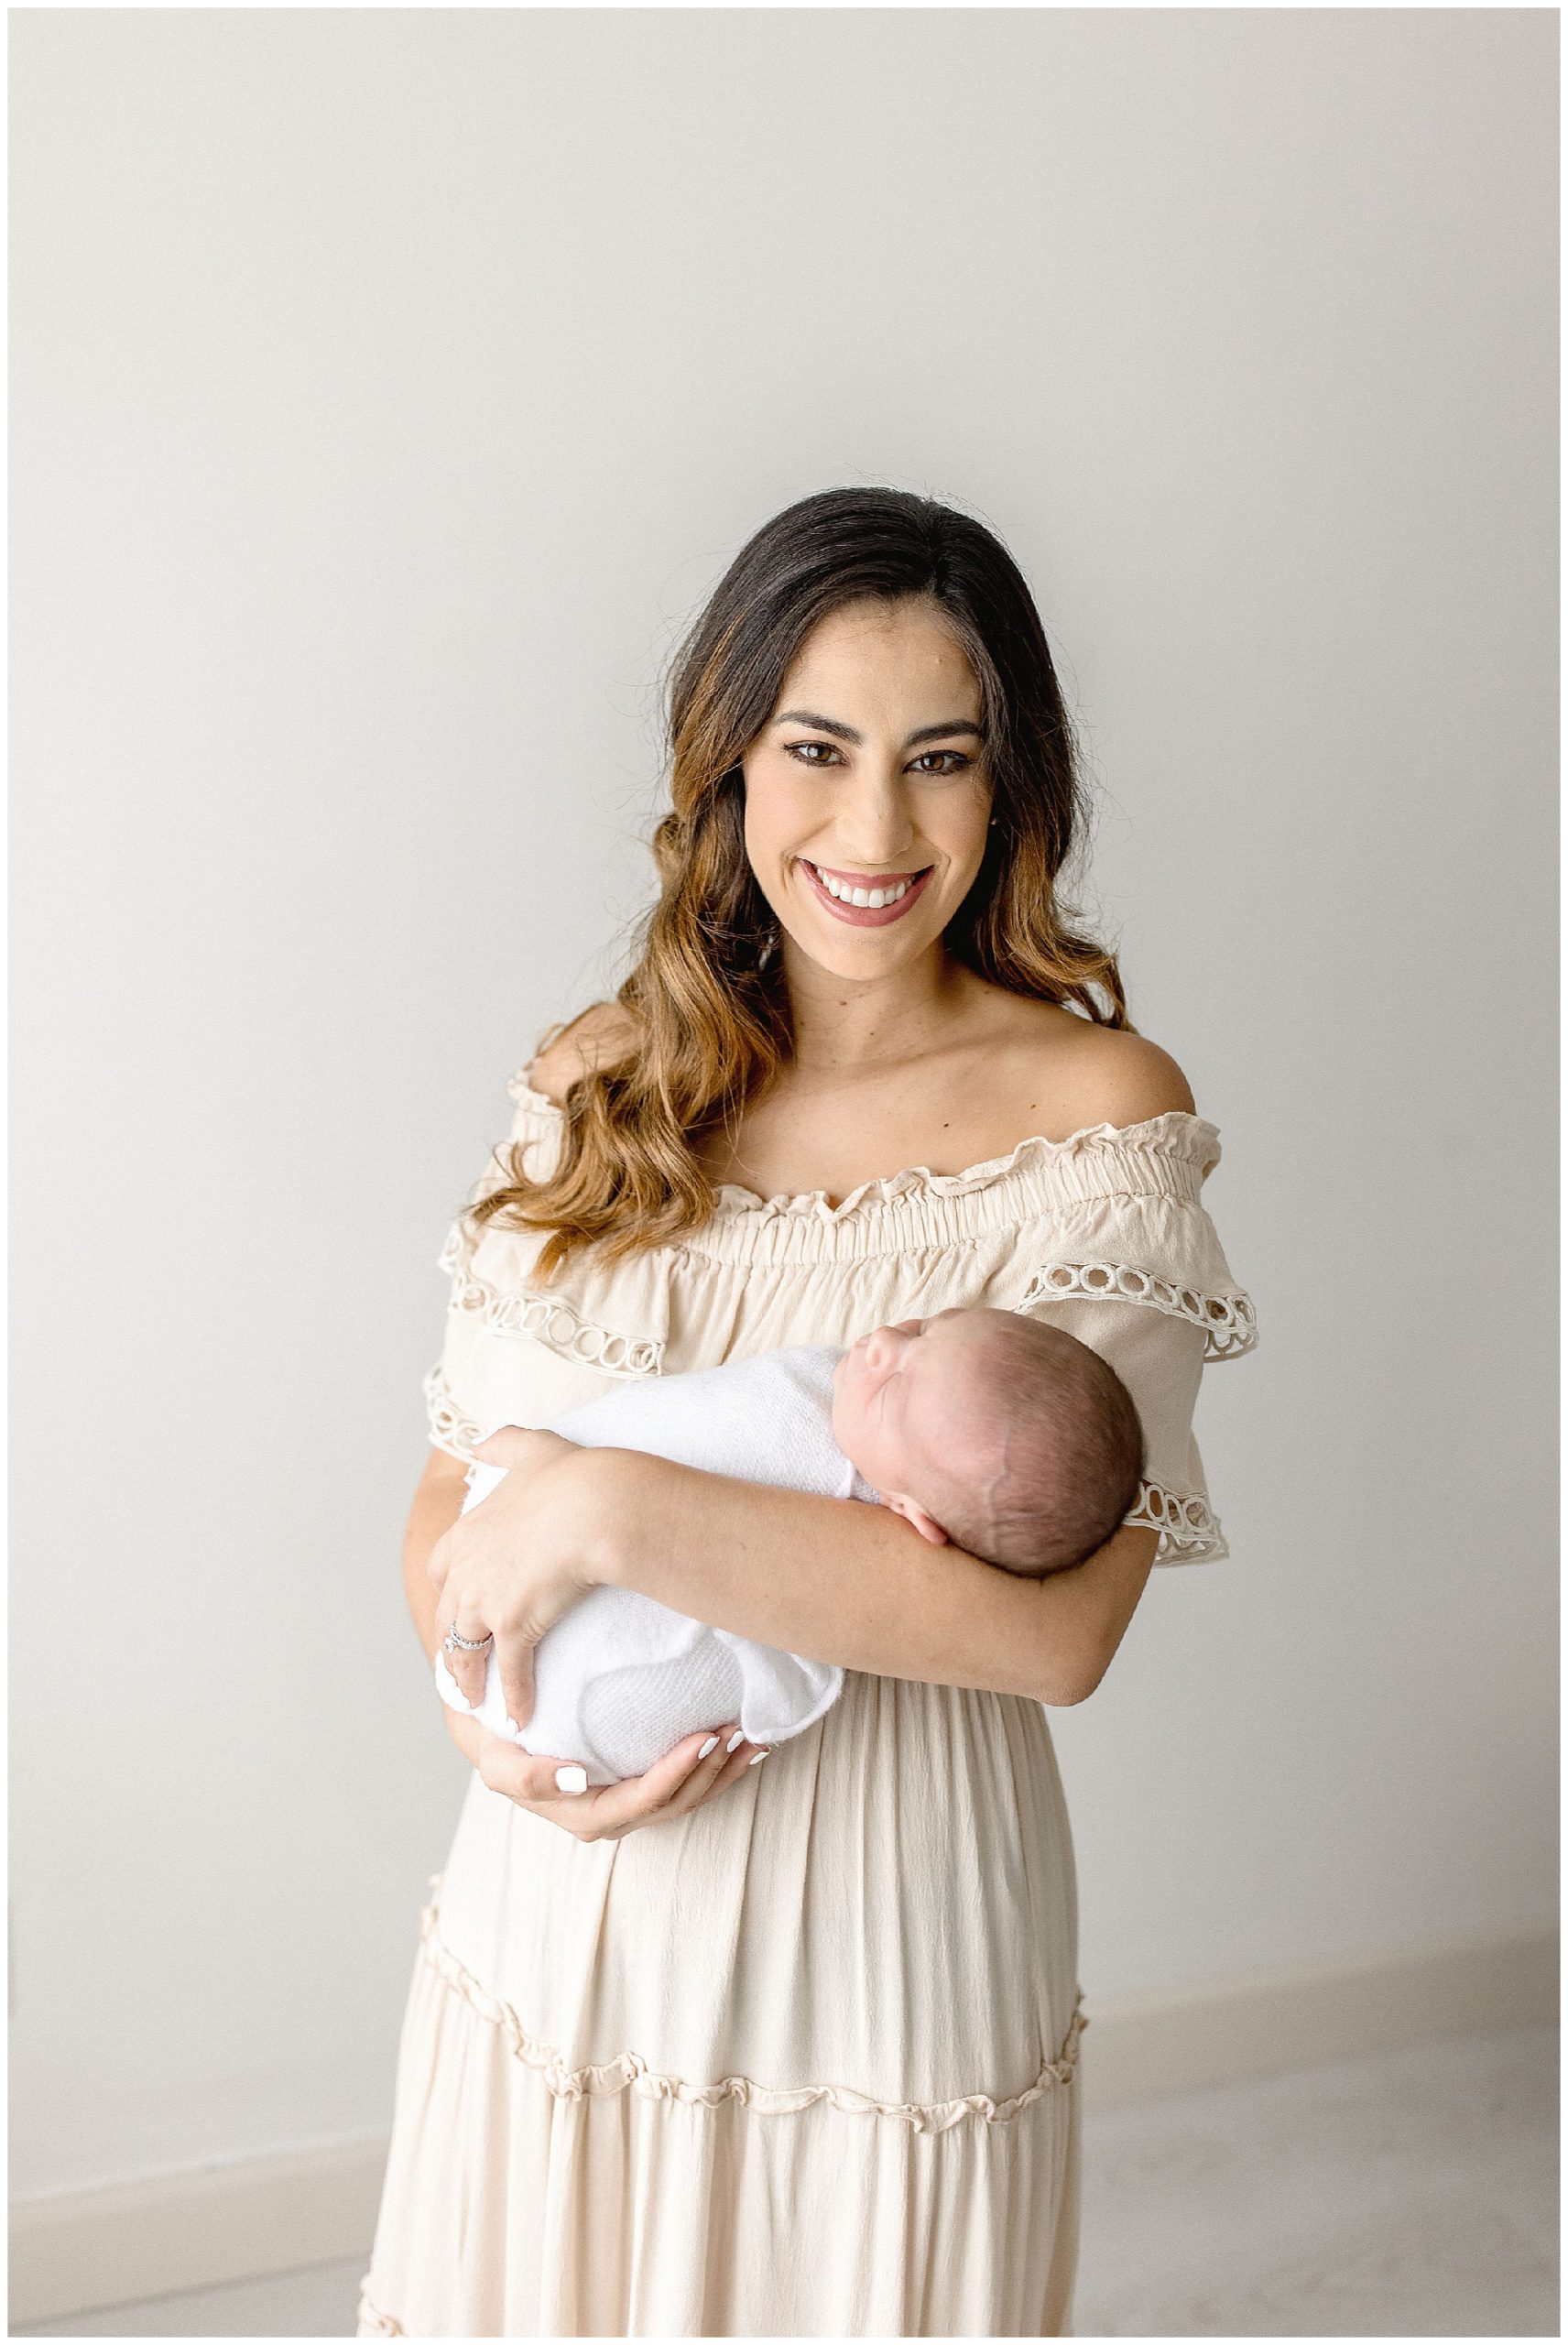 Mom holds her new son during South Florida newborn session. Photo by Ivanna Vidal Photography.